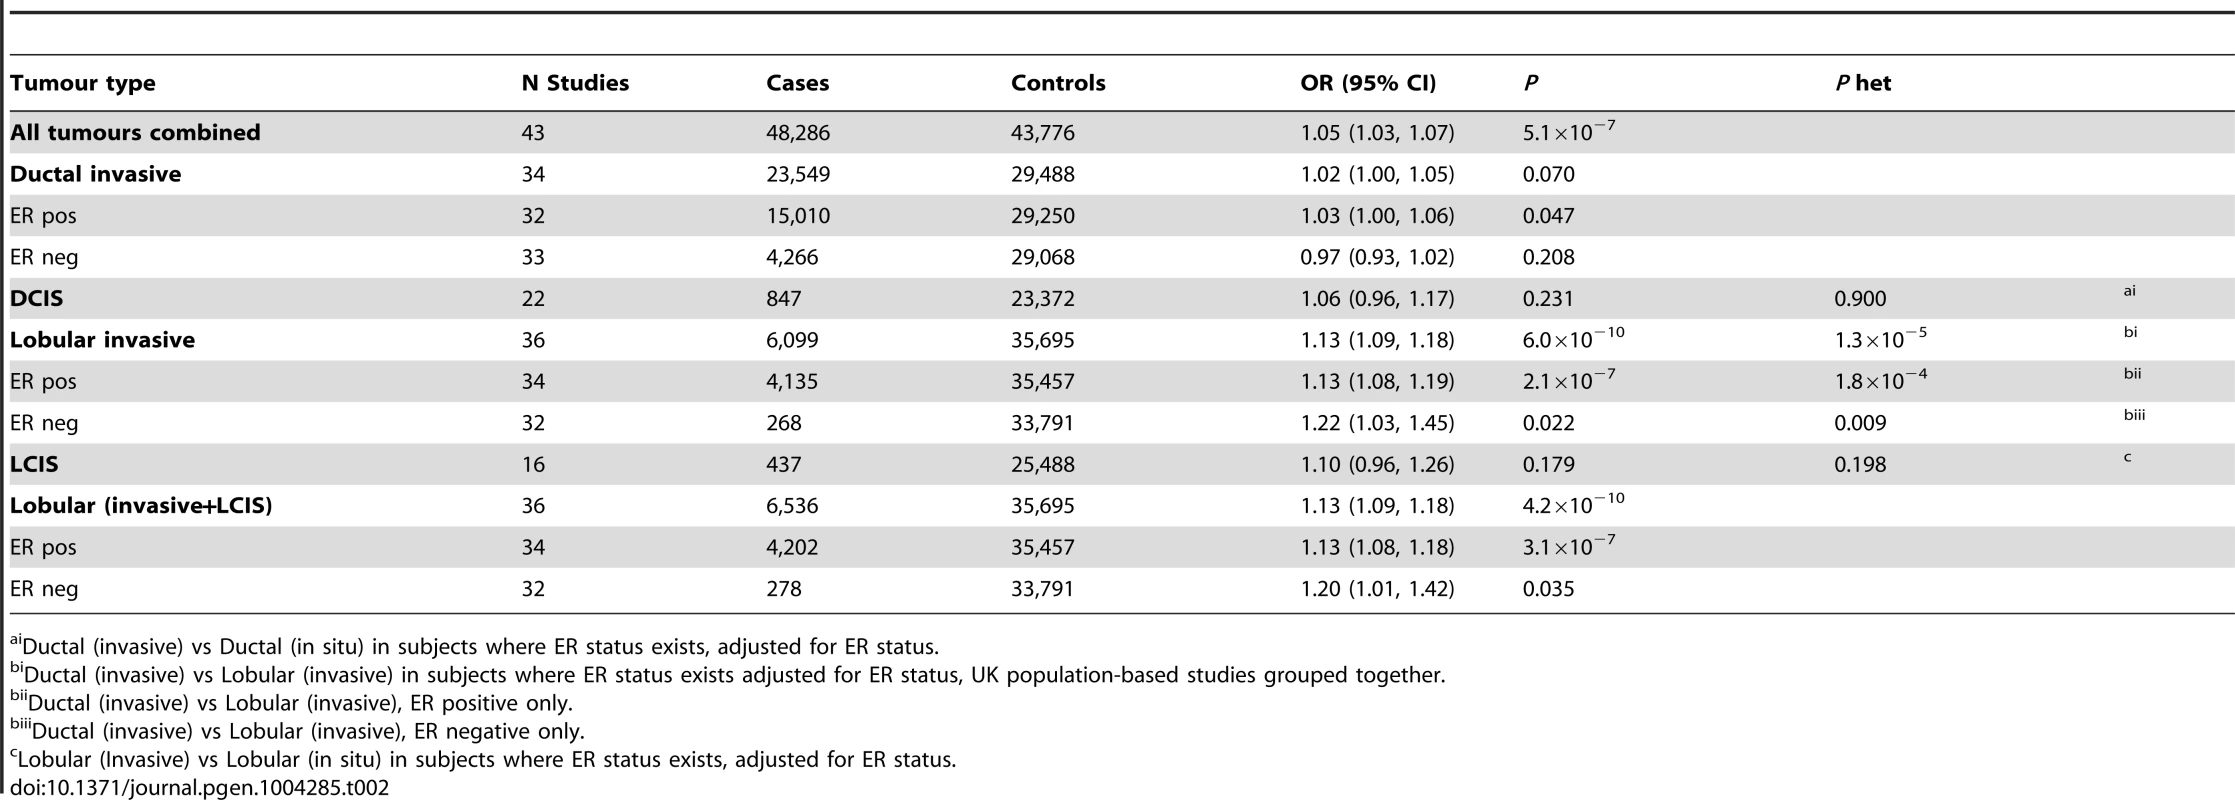 Association with risk of breast cancer for rs11977670 stratified by breast cancer tumour subtypes (Pooled analysis, BCAC, GLACIER, UK PHASE II).